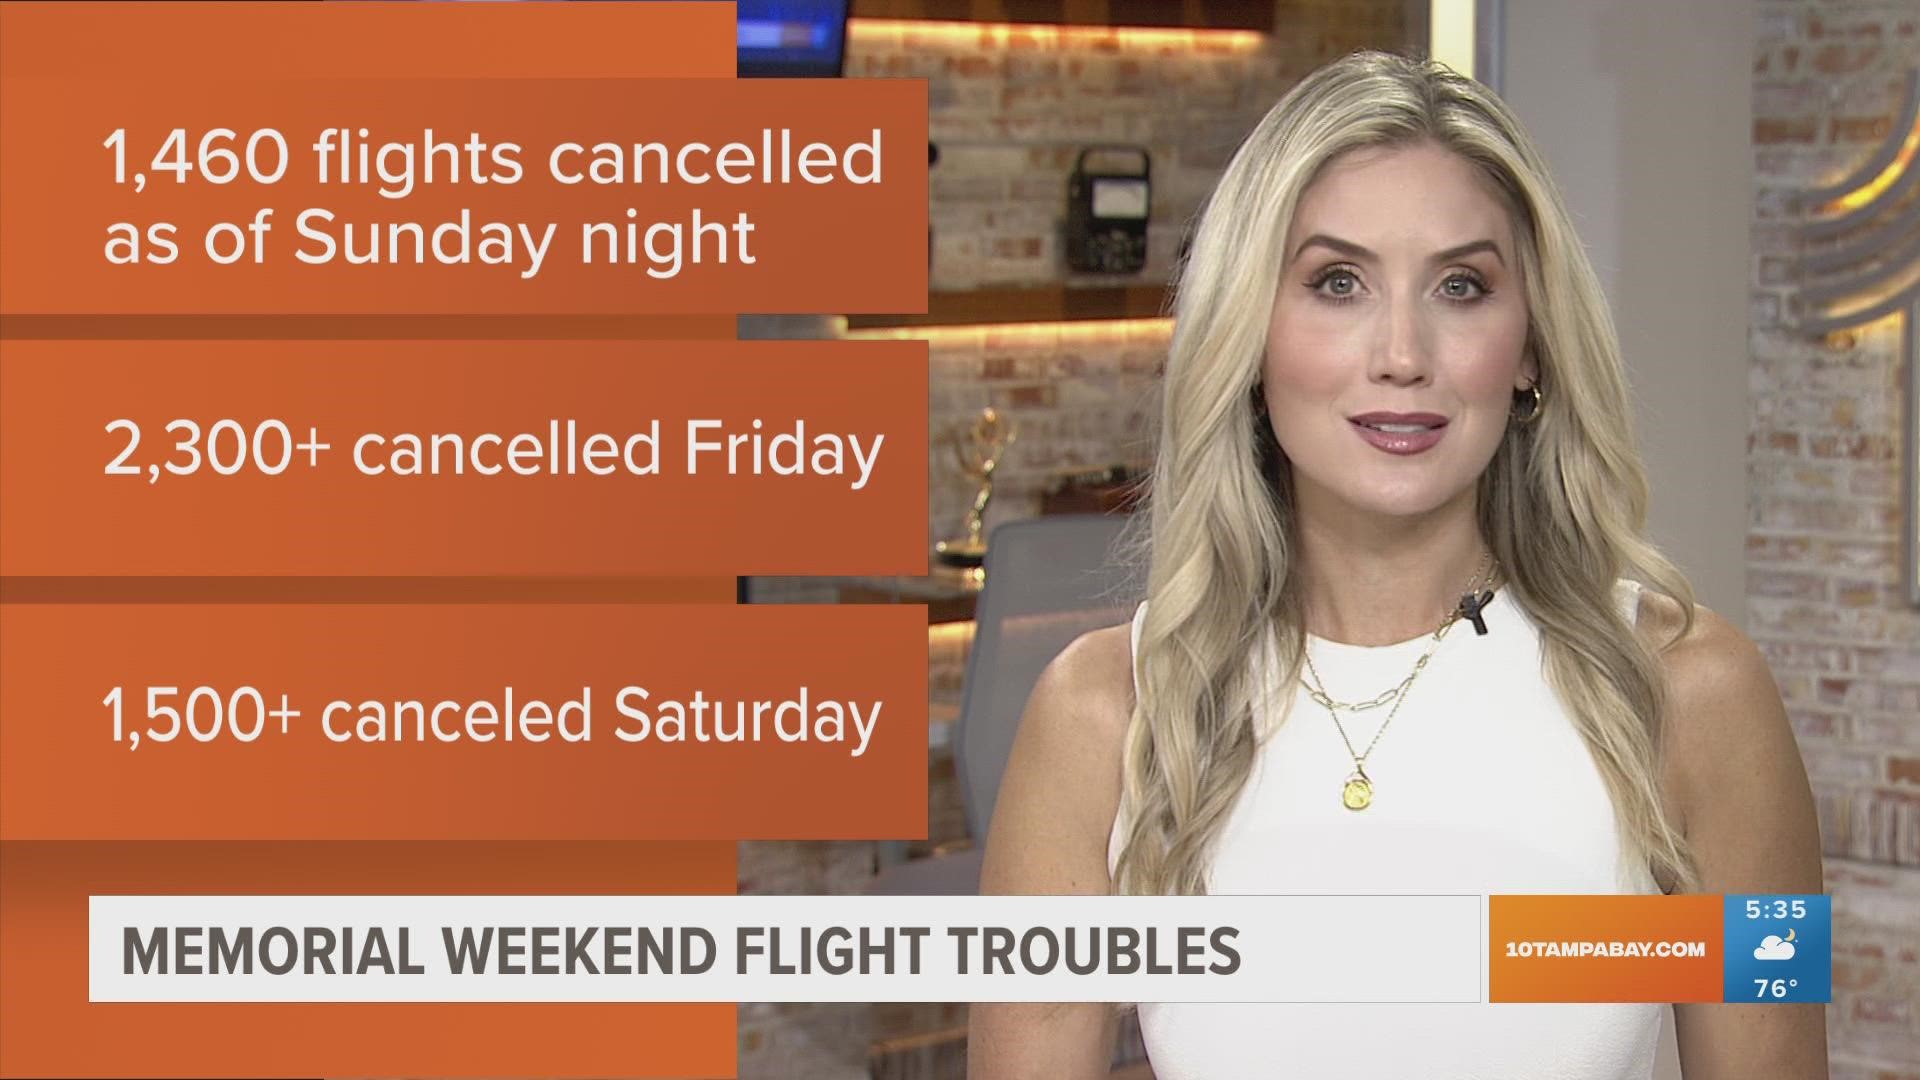 More than 1,600 flights worldwide were canceled on Sunday. That followed more than 2,300 cancellations Friday and another 1,500 on Saturday.